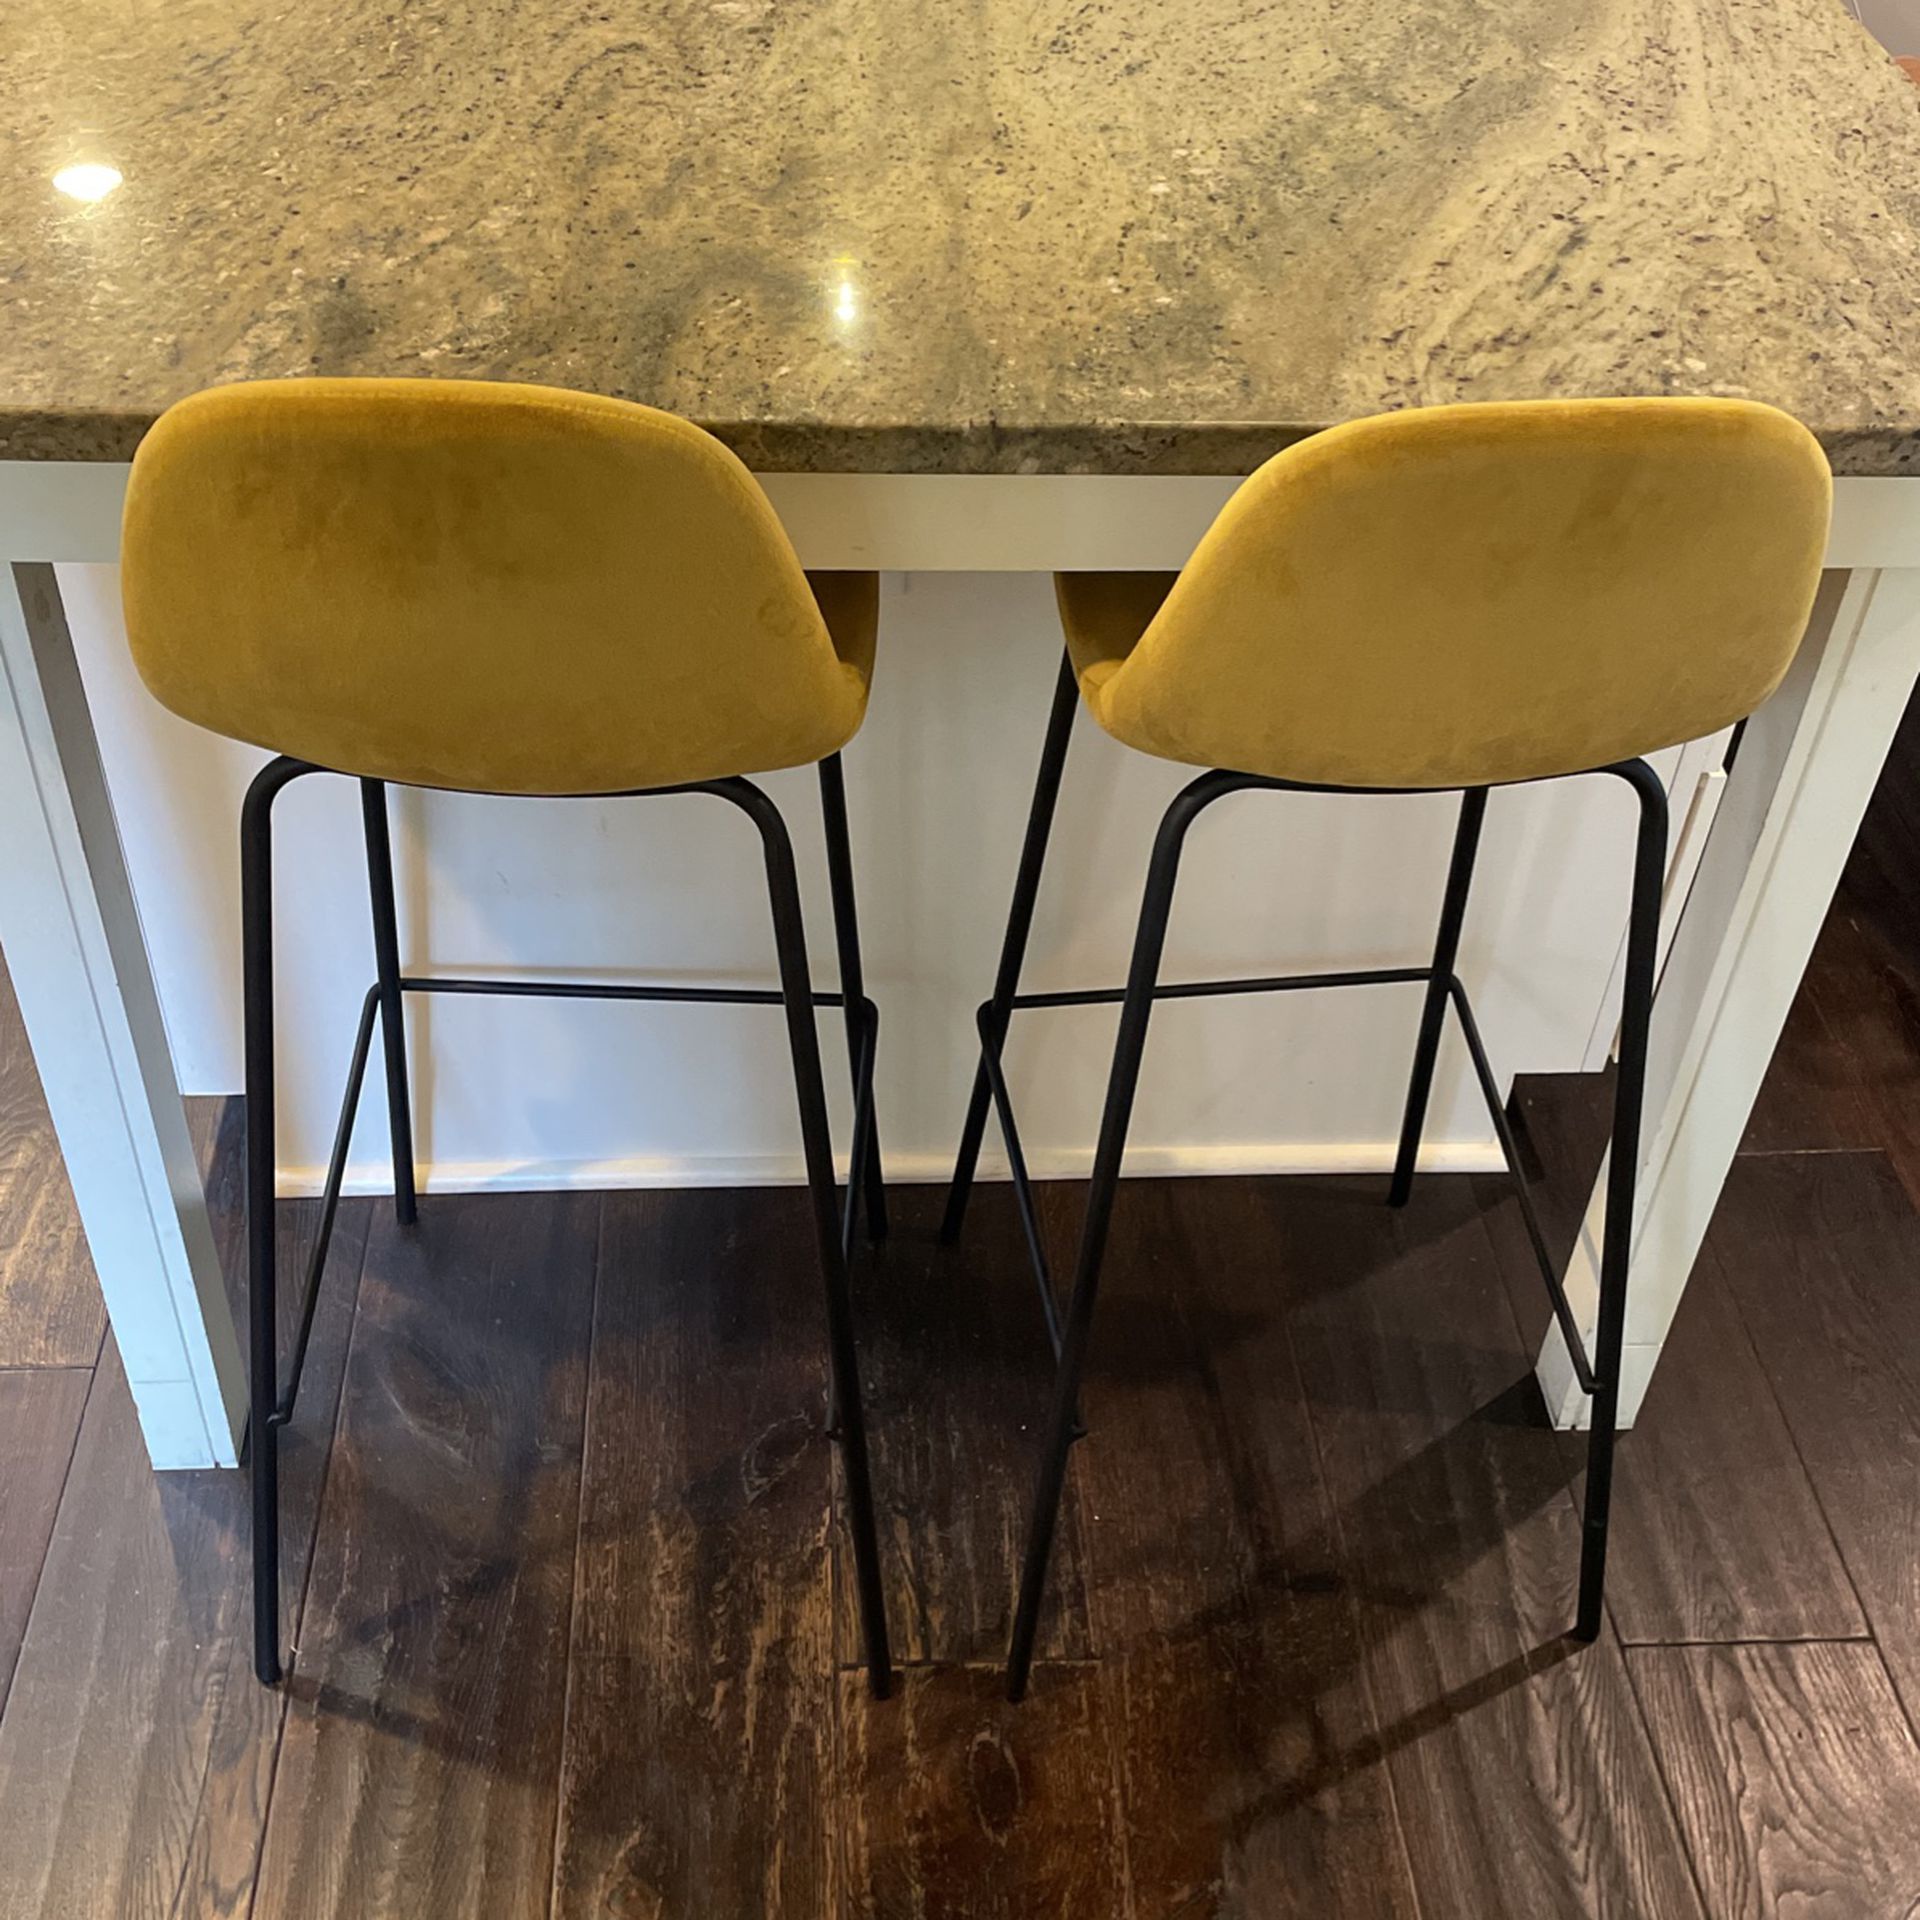 Two Vintage Gold Bar Stools